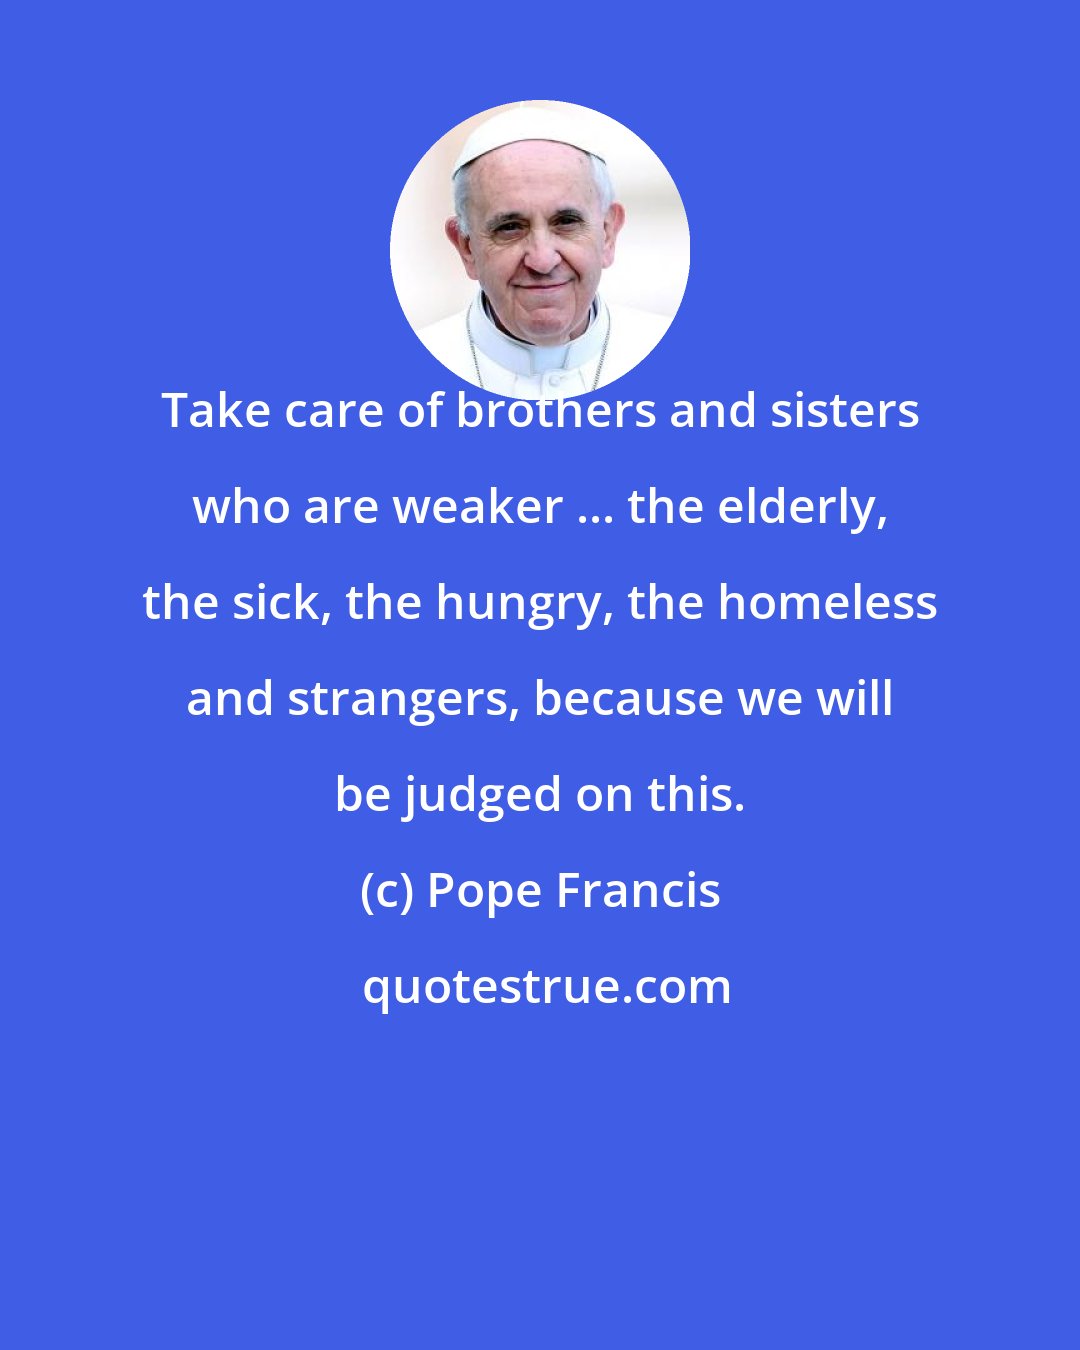 Pope Francis: Take care of brothers and sisters who are weaker ... the elderly, the sick, the hungry, the homeless and strangers, because we will be judged on this.